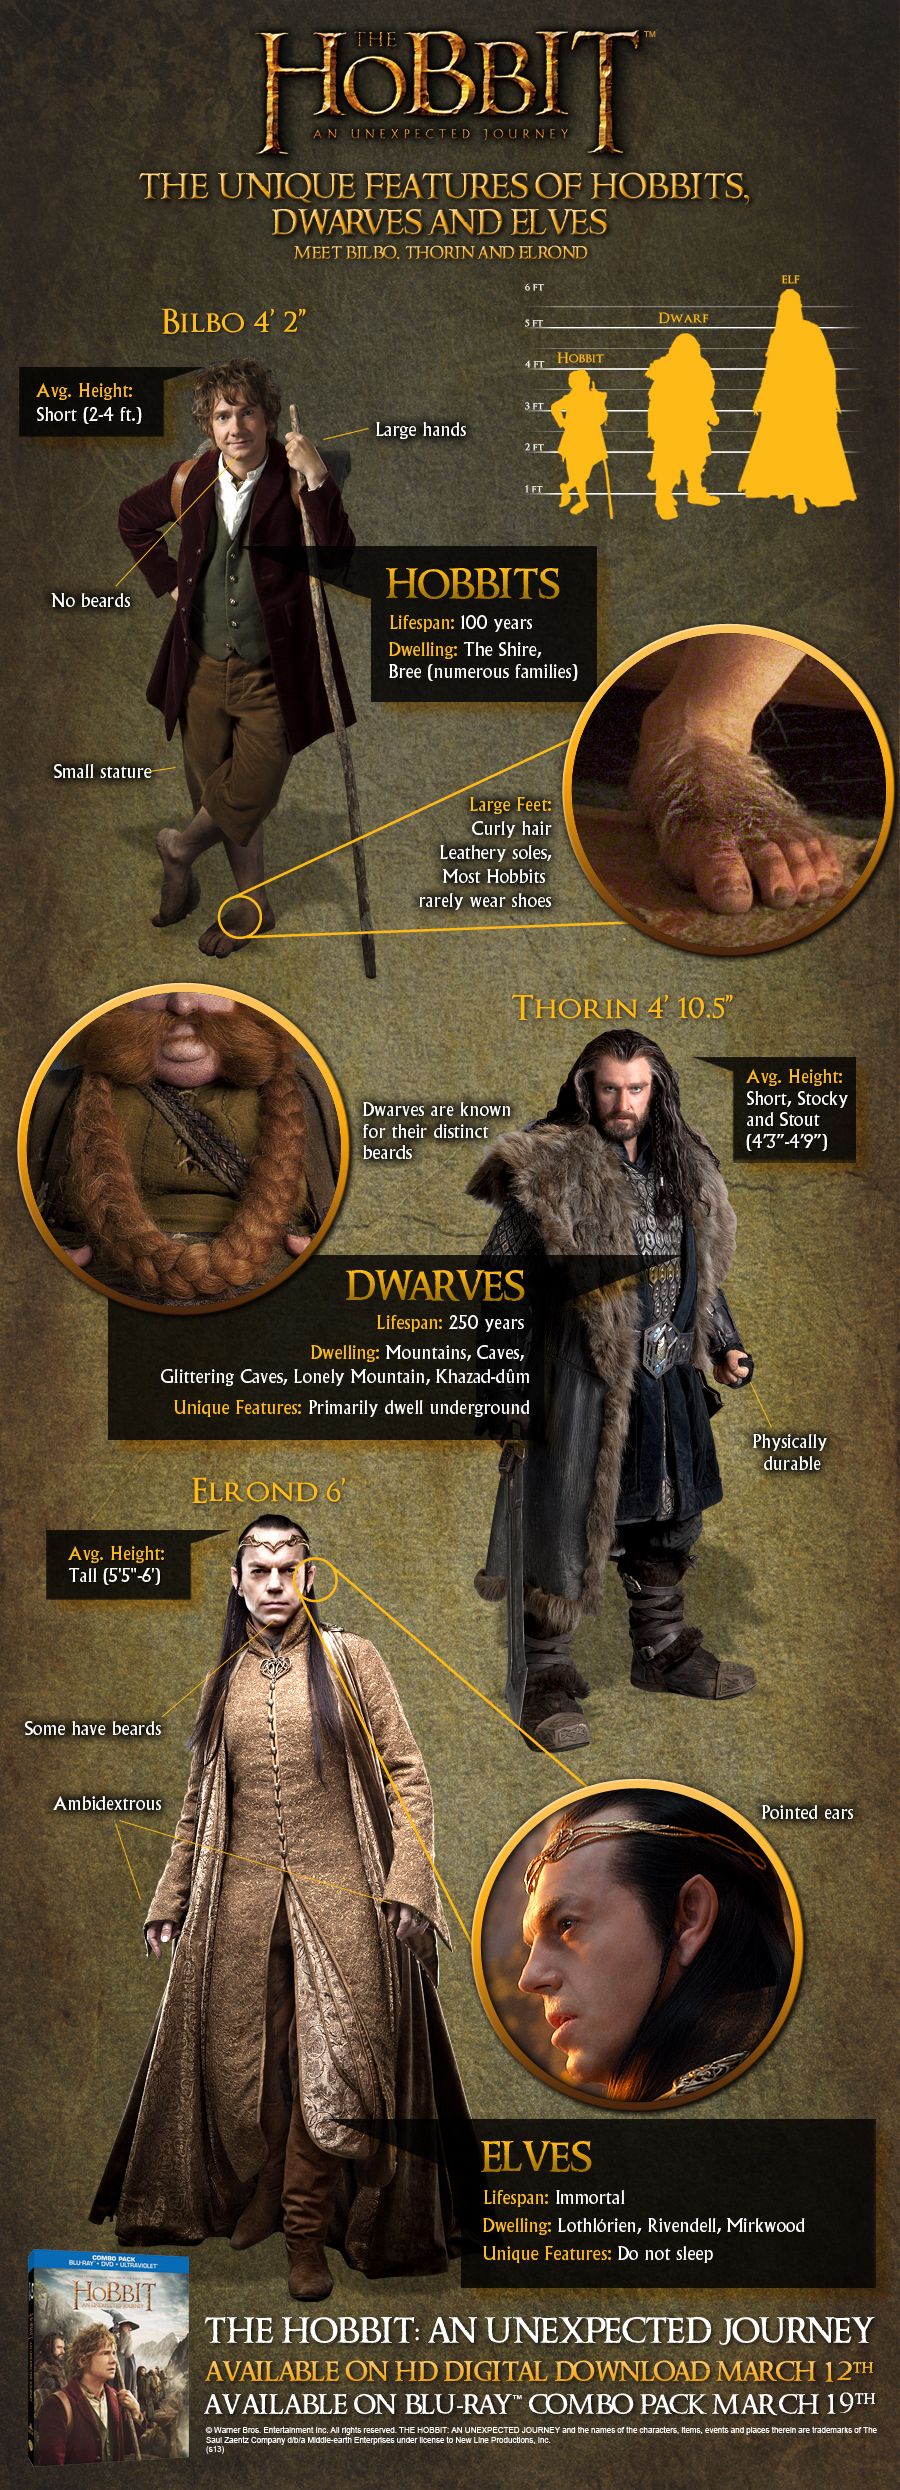 The Hobbit: An Unexpected Journey Blu-ray Infographic